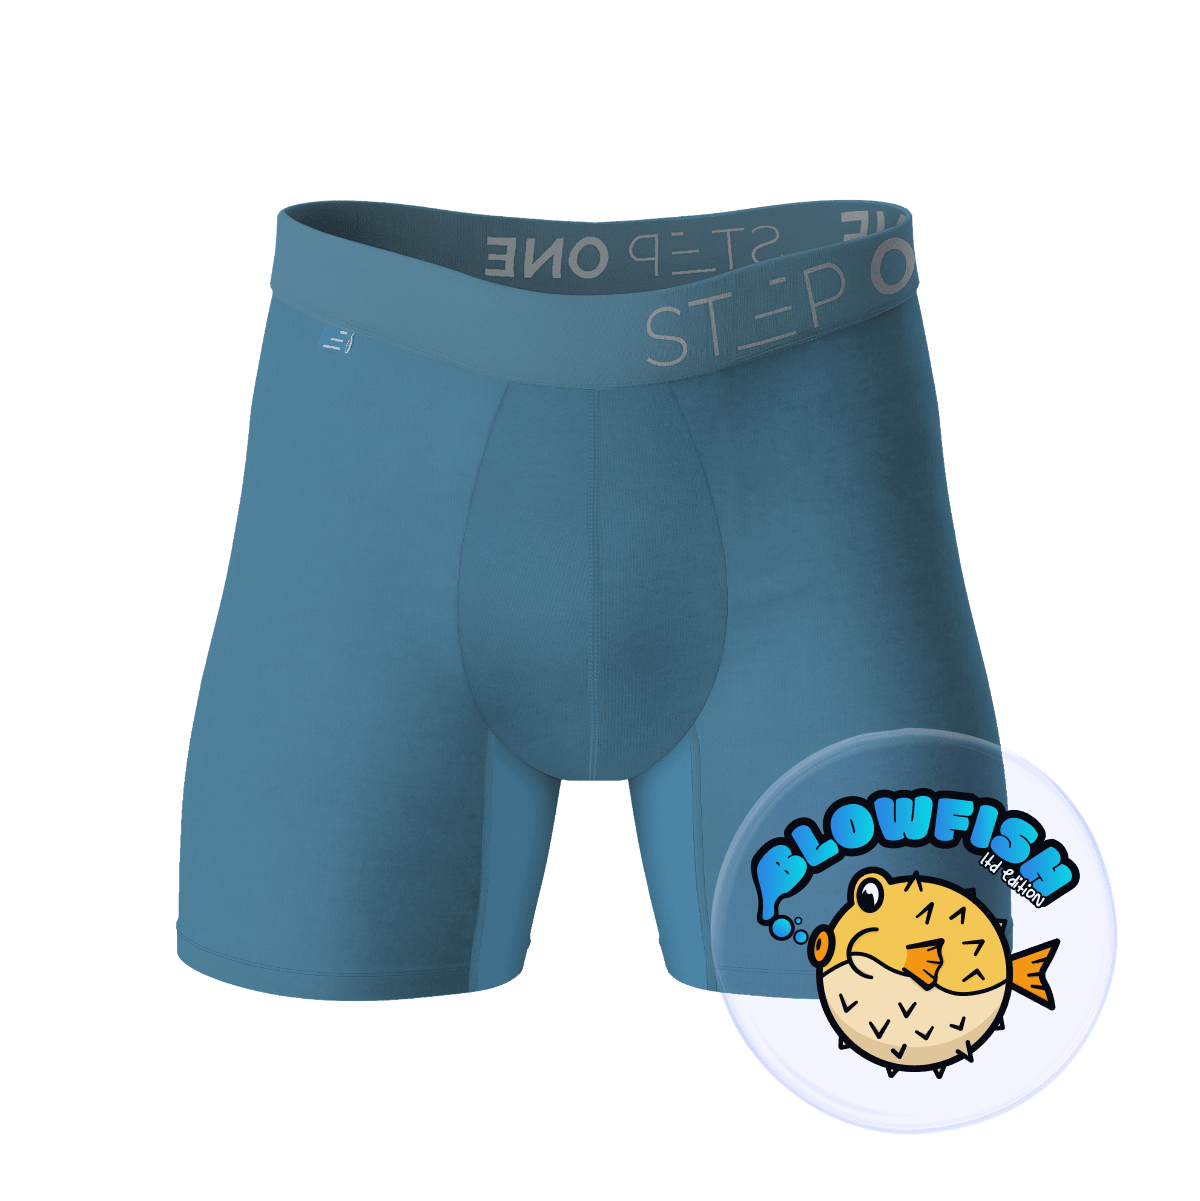 STEP ONE New Mens Trunks (Shorter) Bamboo Underwear- Limited